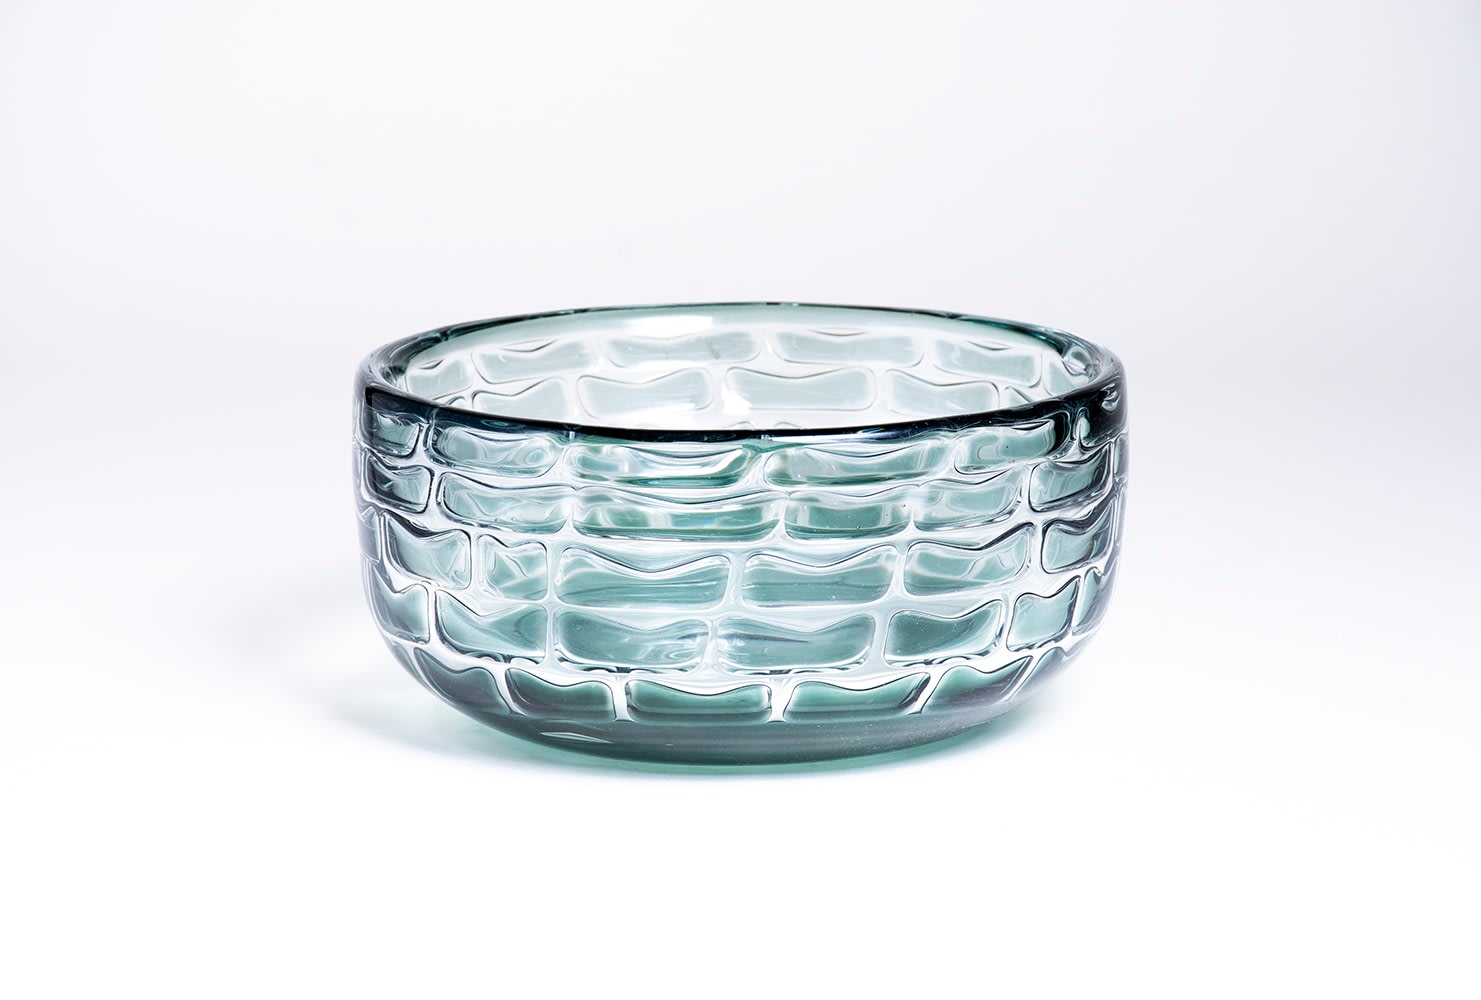 a low wide bowl, in the ariel technique by orrefors, with a brick-like pattern formed by a gray-green glass and trapped air bubbles in the swedish overlay technique